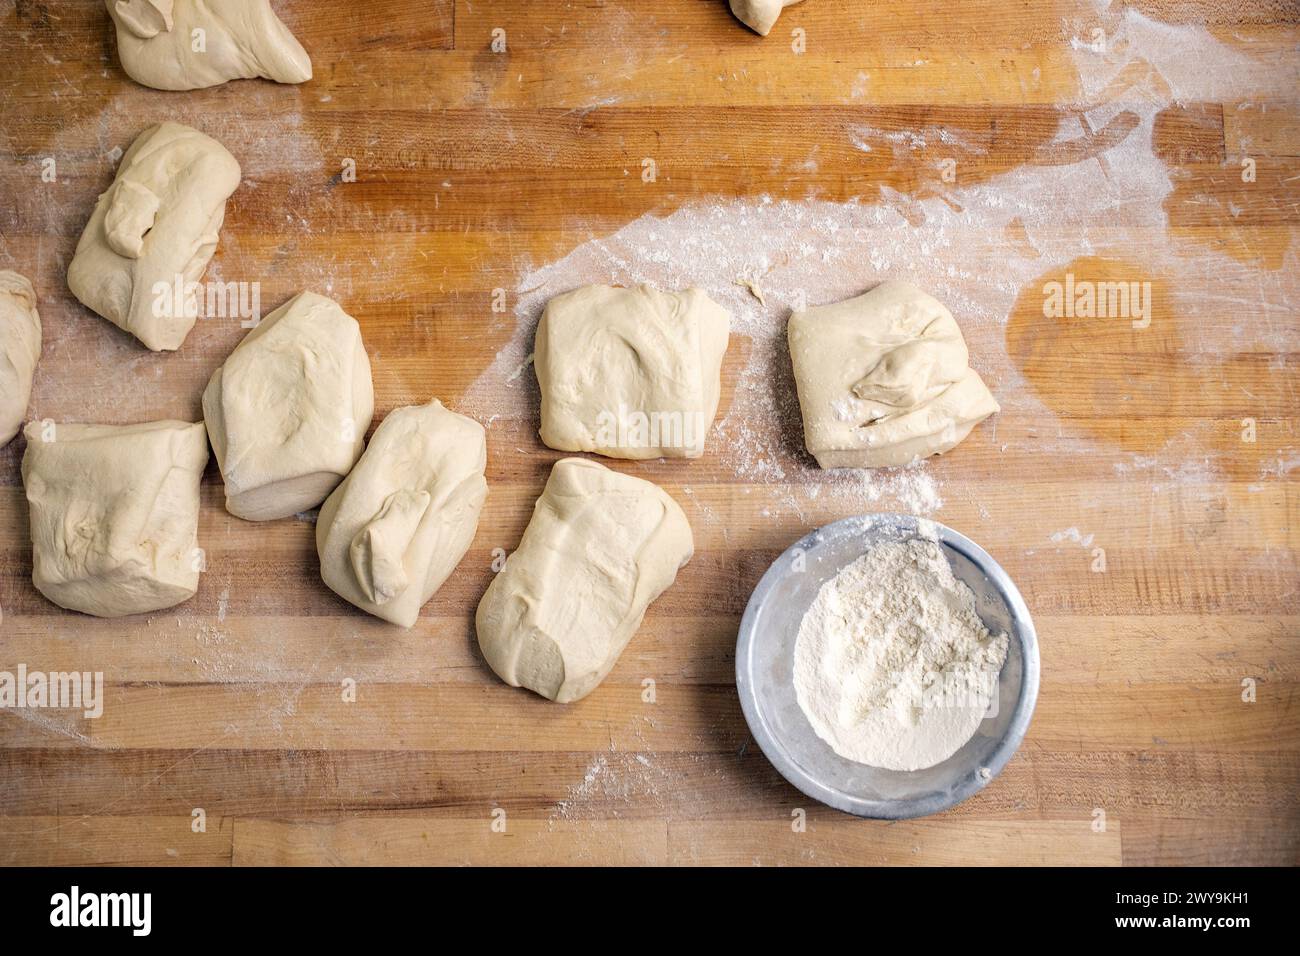 Bread dough separated into portioned loaves on a wood counter Stock Photo